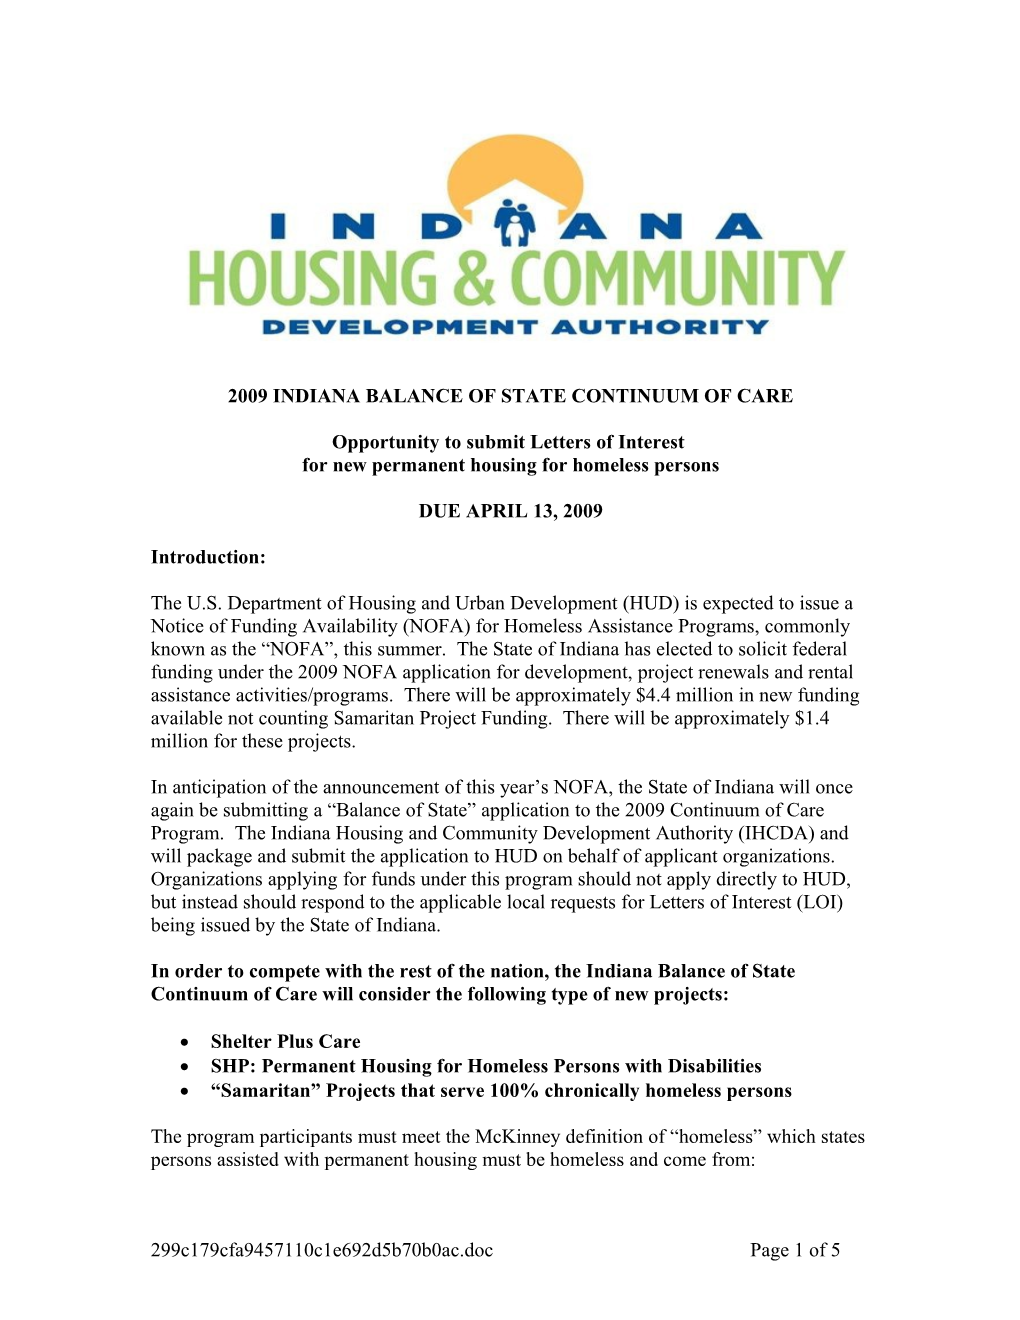 Indiana Continuum of Care Application